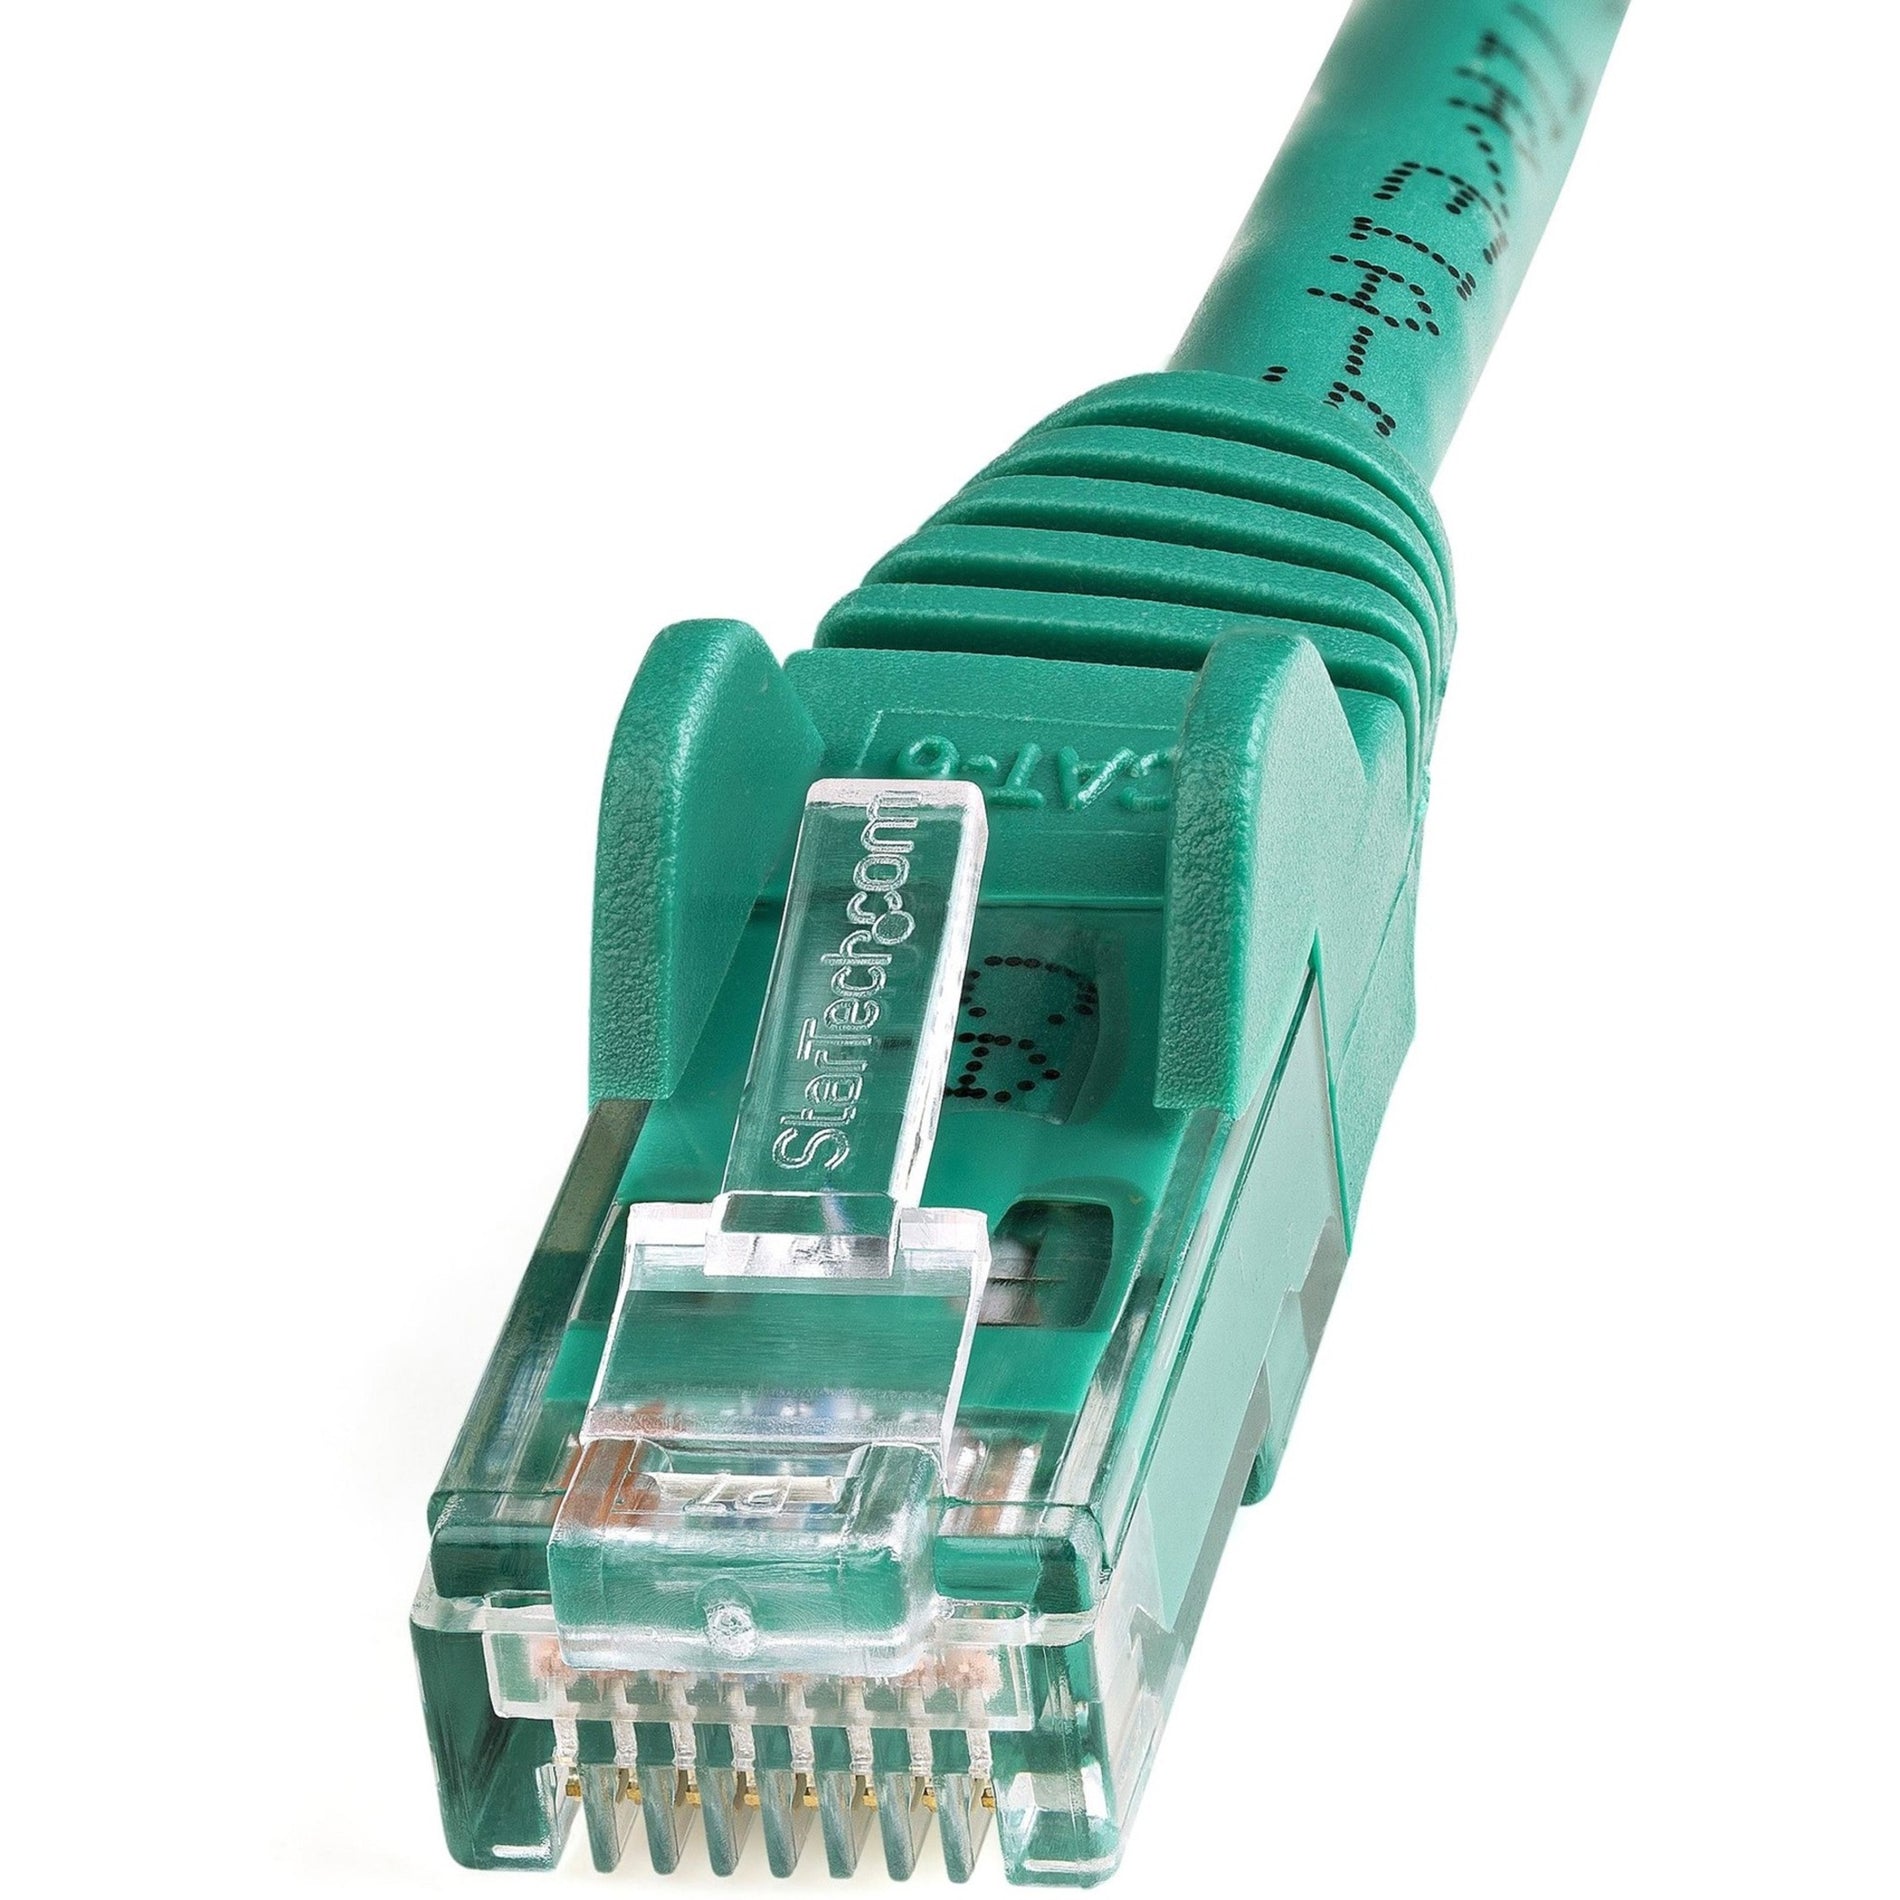 StarTech.com N6PATCH150GN Cat6 Patch Cable, 150ft Green Ethernet Cable, Snagless RJ45 Connectors